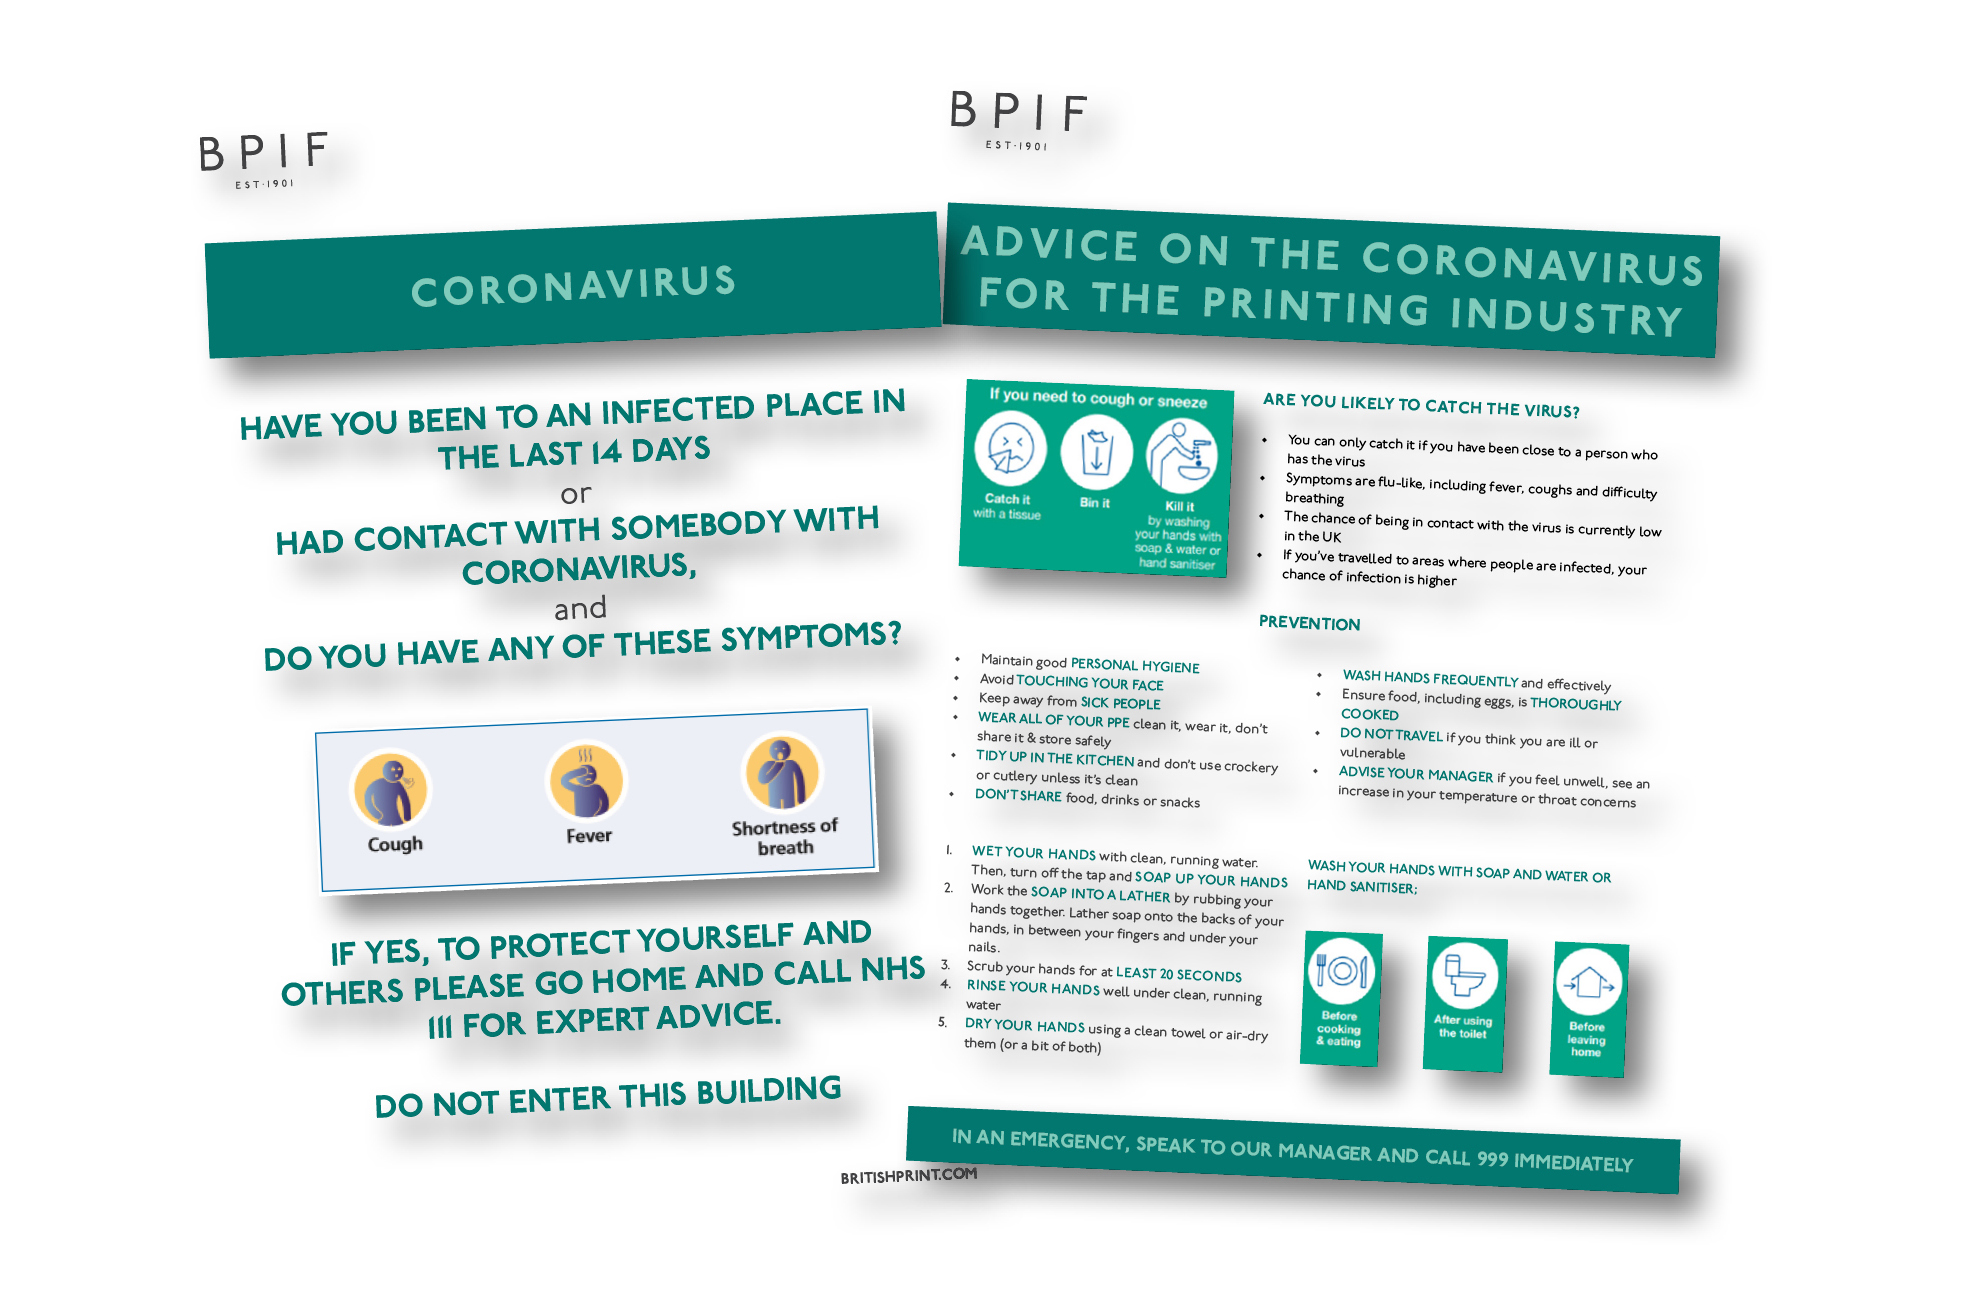 Coronavirus – business best practice – ensure robust processes and planning to protect employees and business resilience 